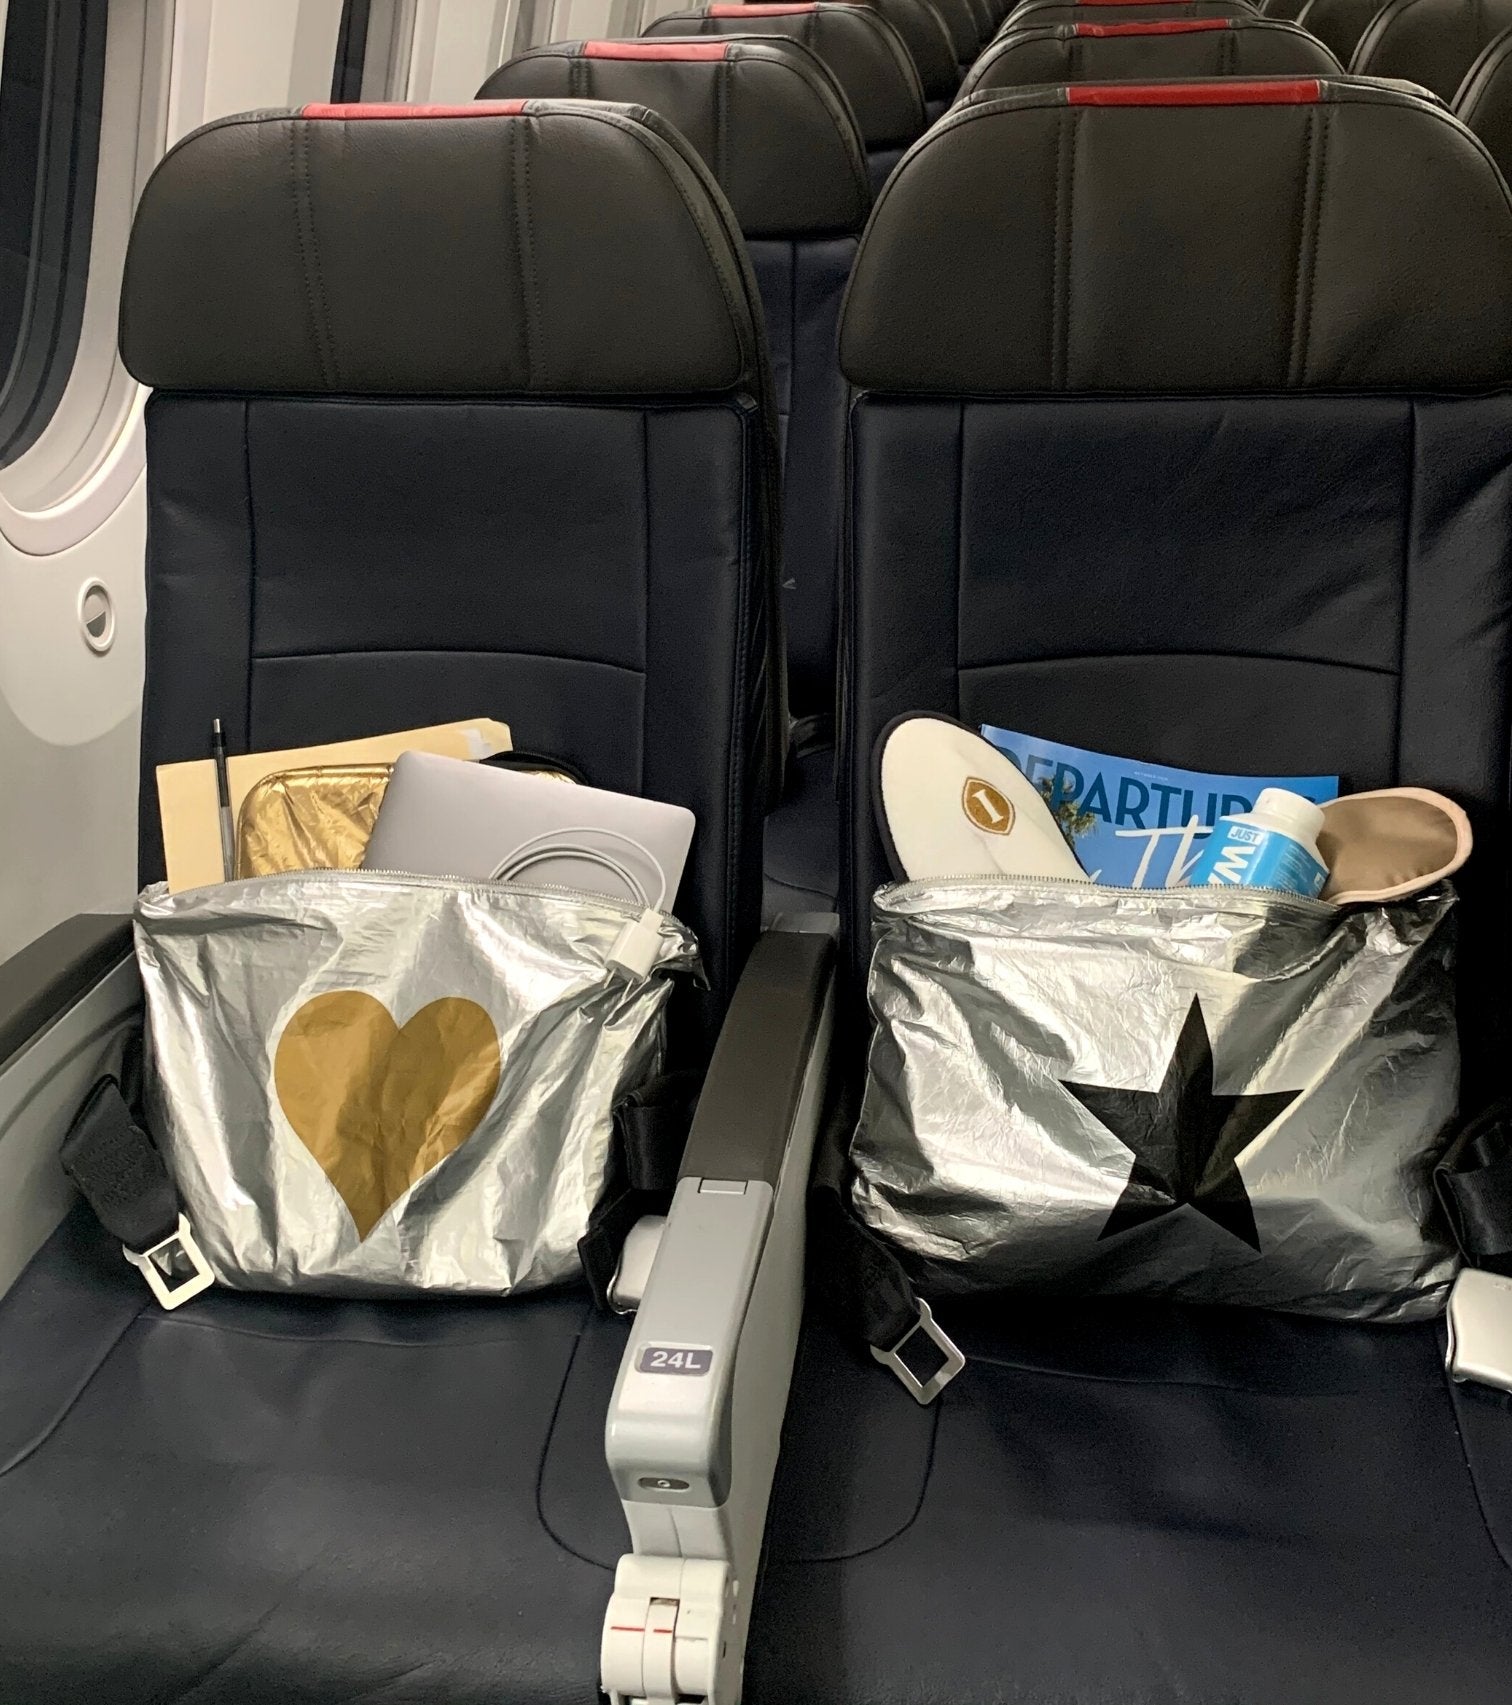 Two jumbo zipper pouches sitting on airplane seats holding laptop and departures magazine